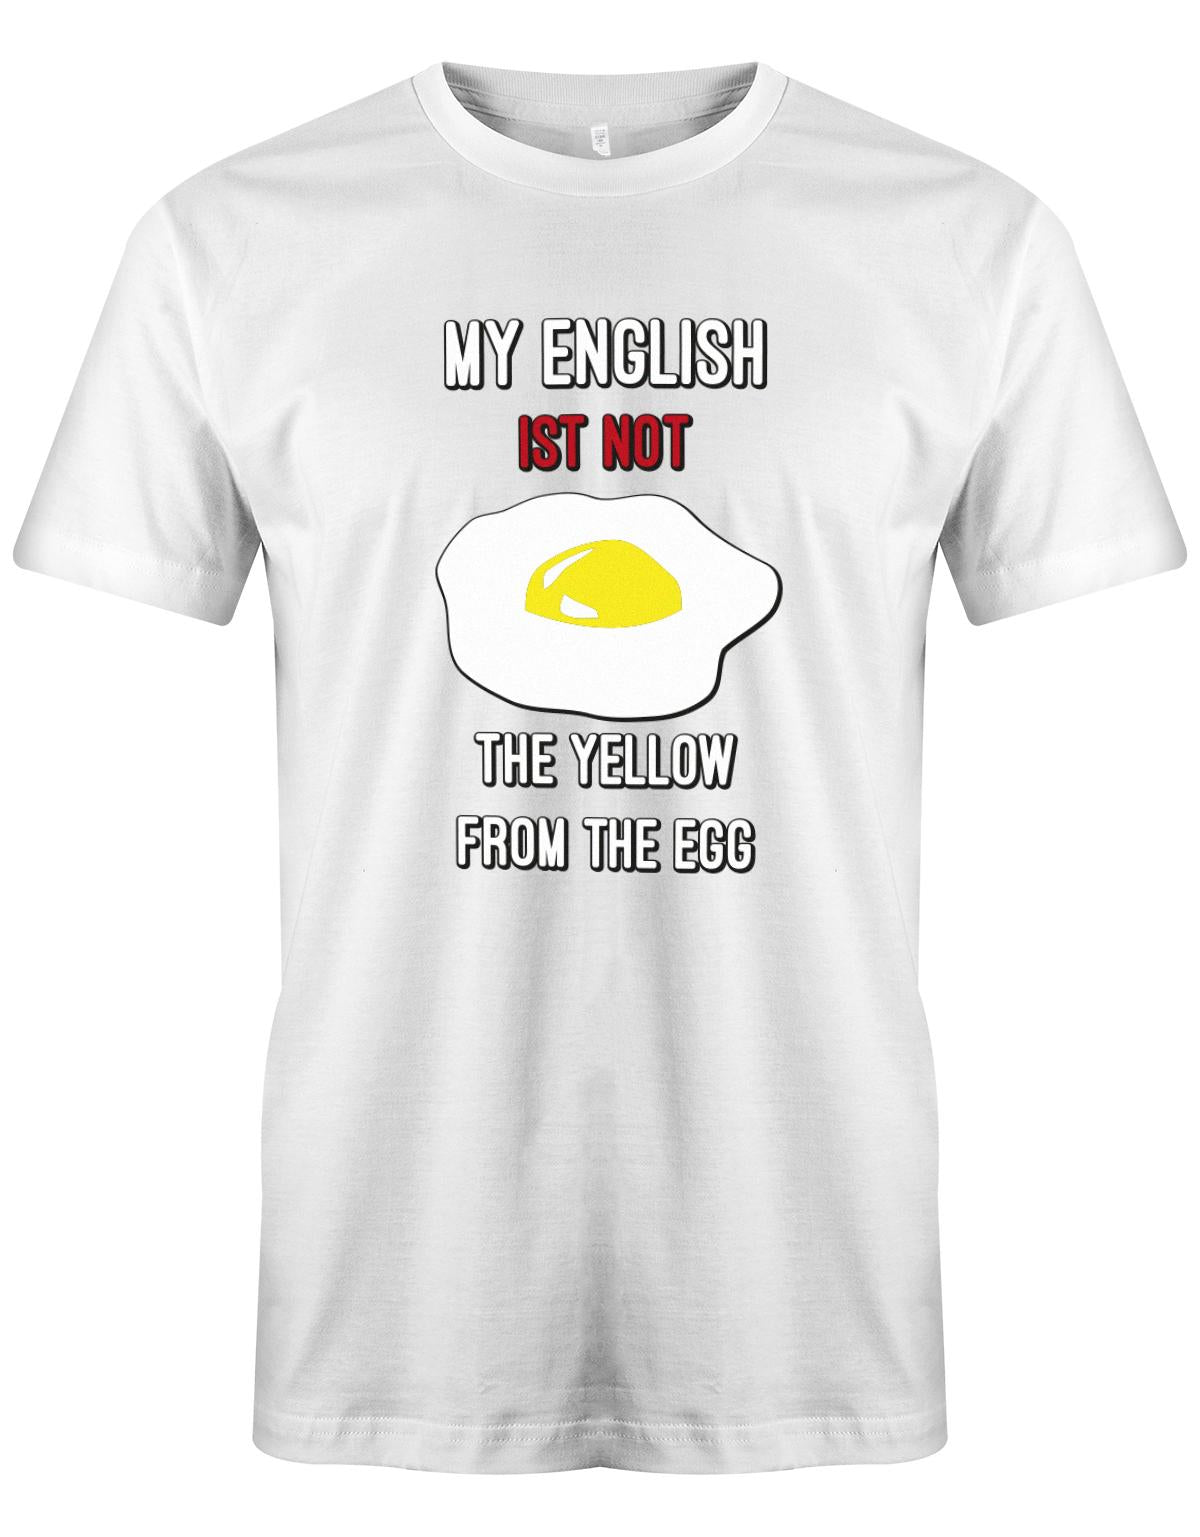 My-English-is-not-the-yellow-from-the-egg-Herren-Shirt-Weiss